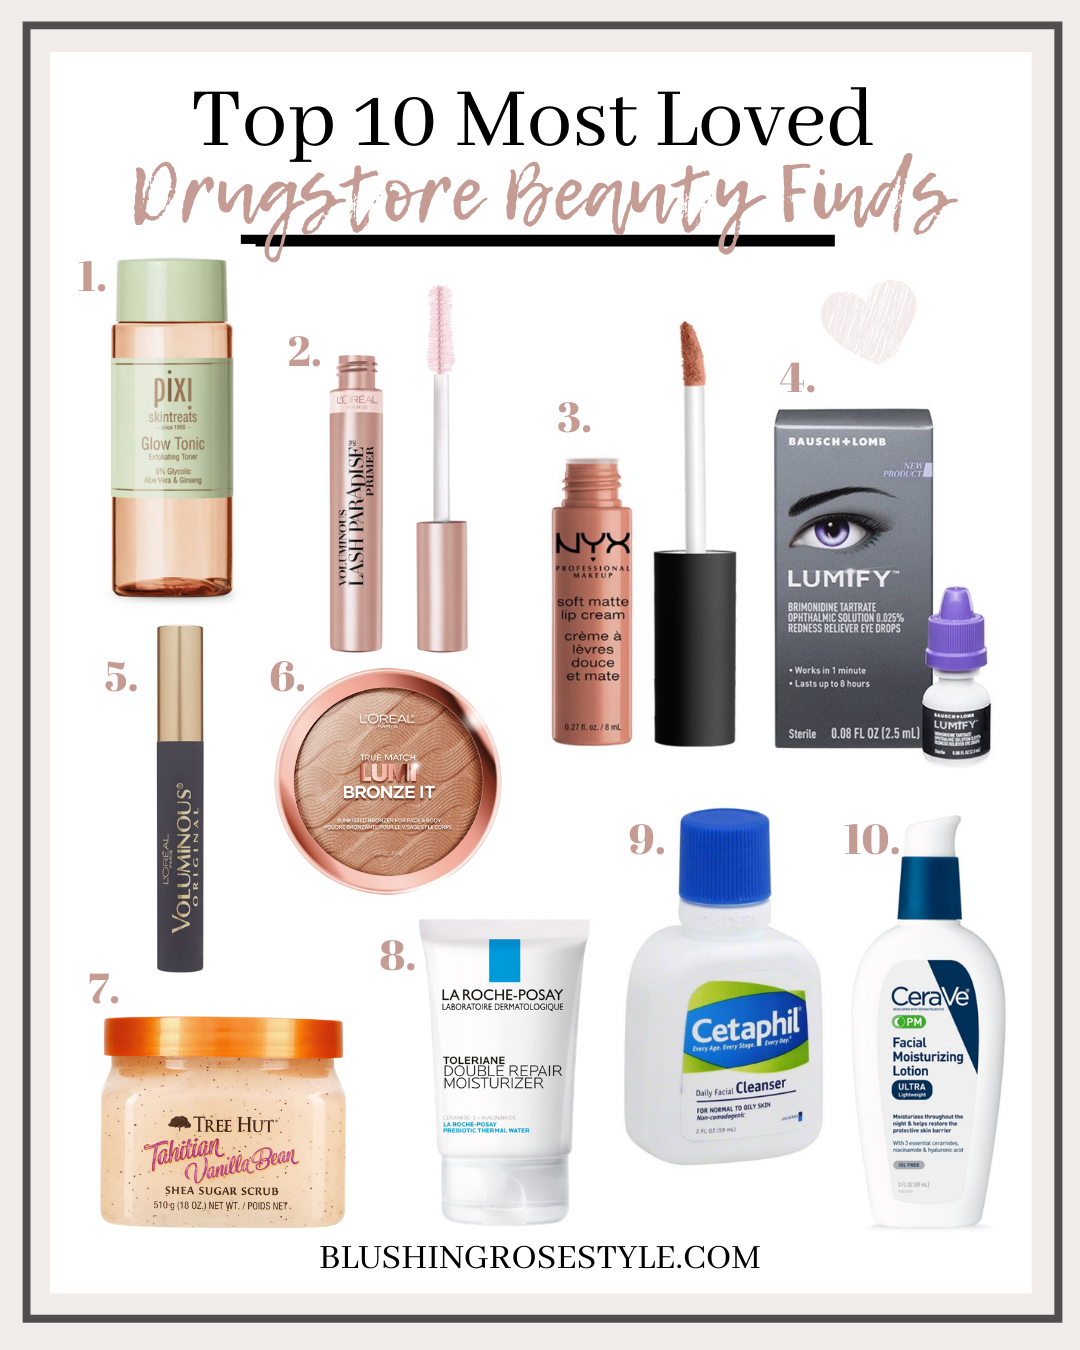 drugstore beauty finds